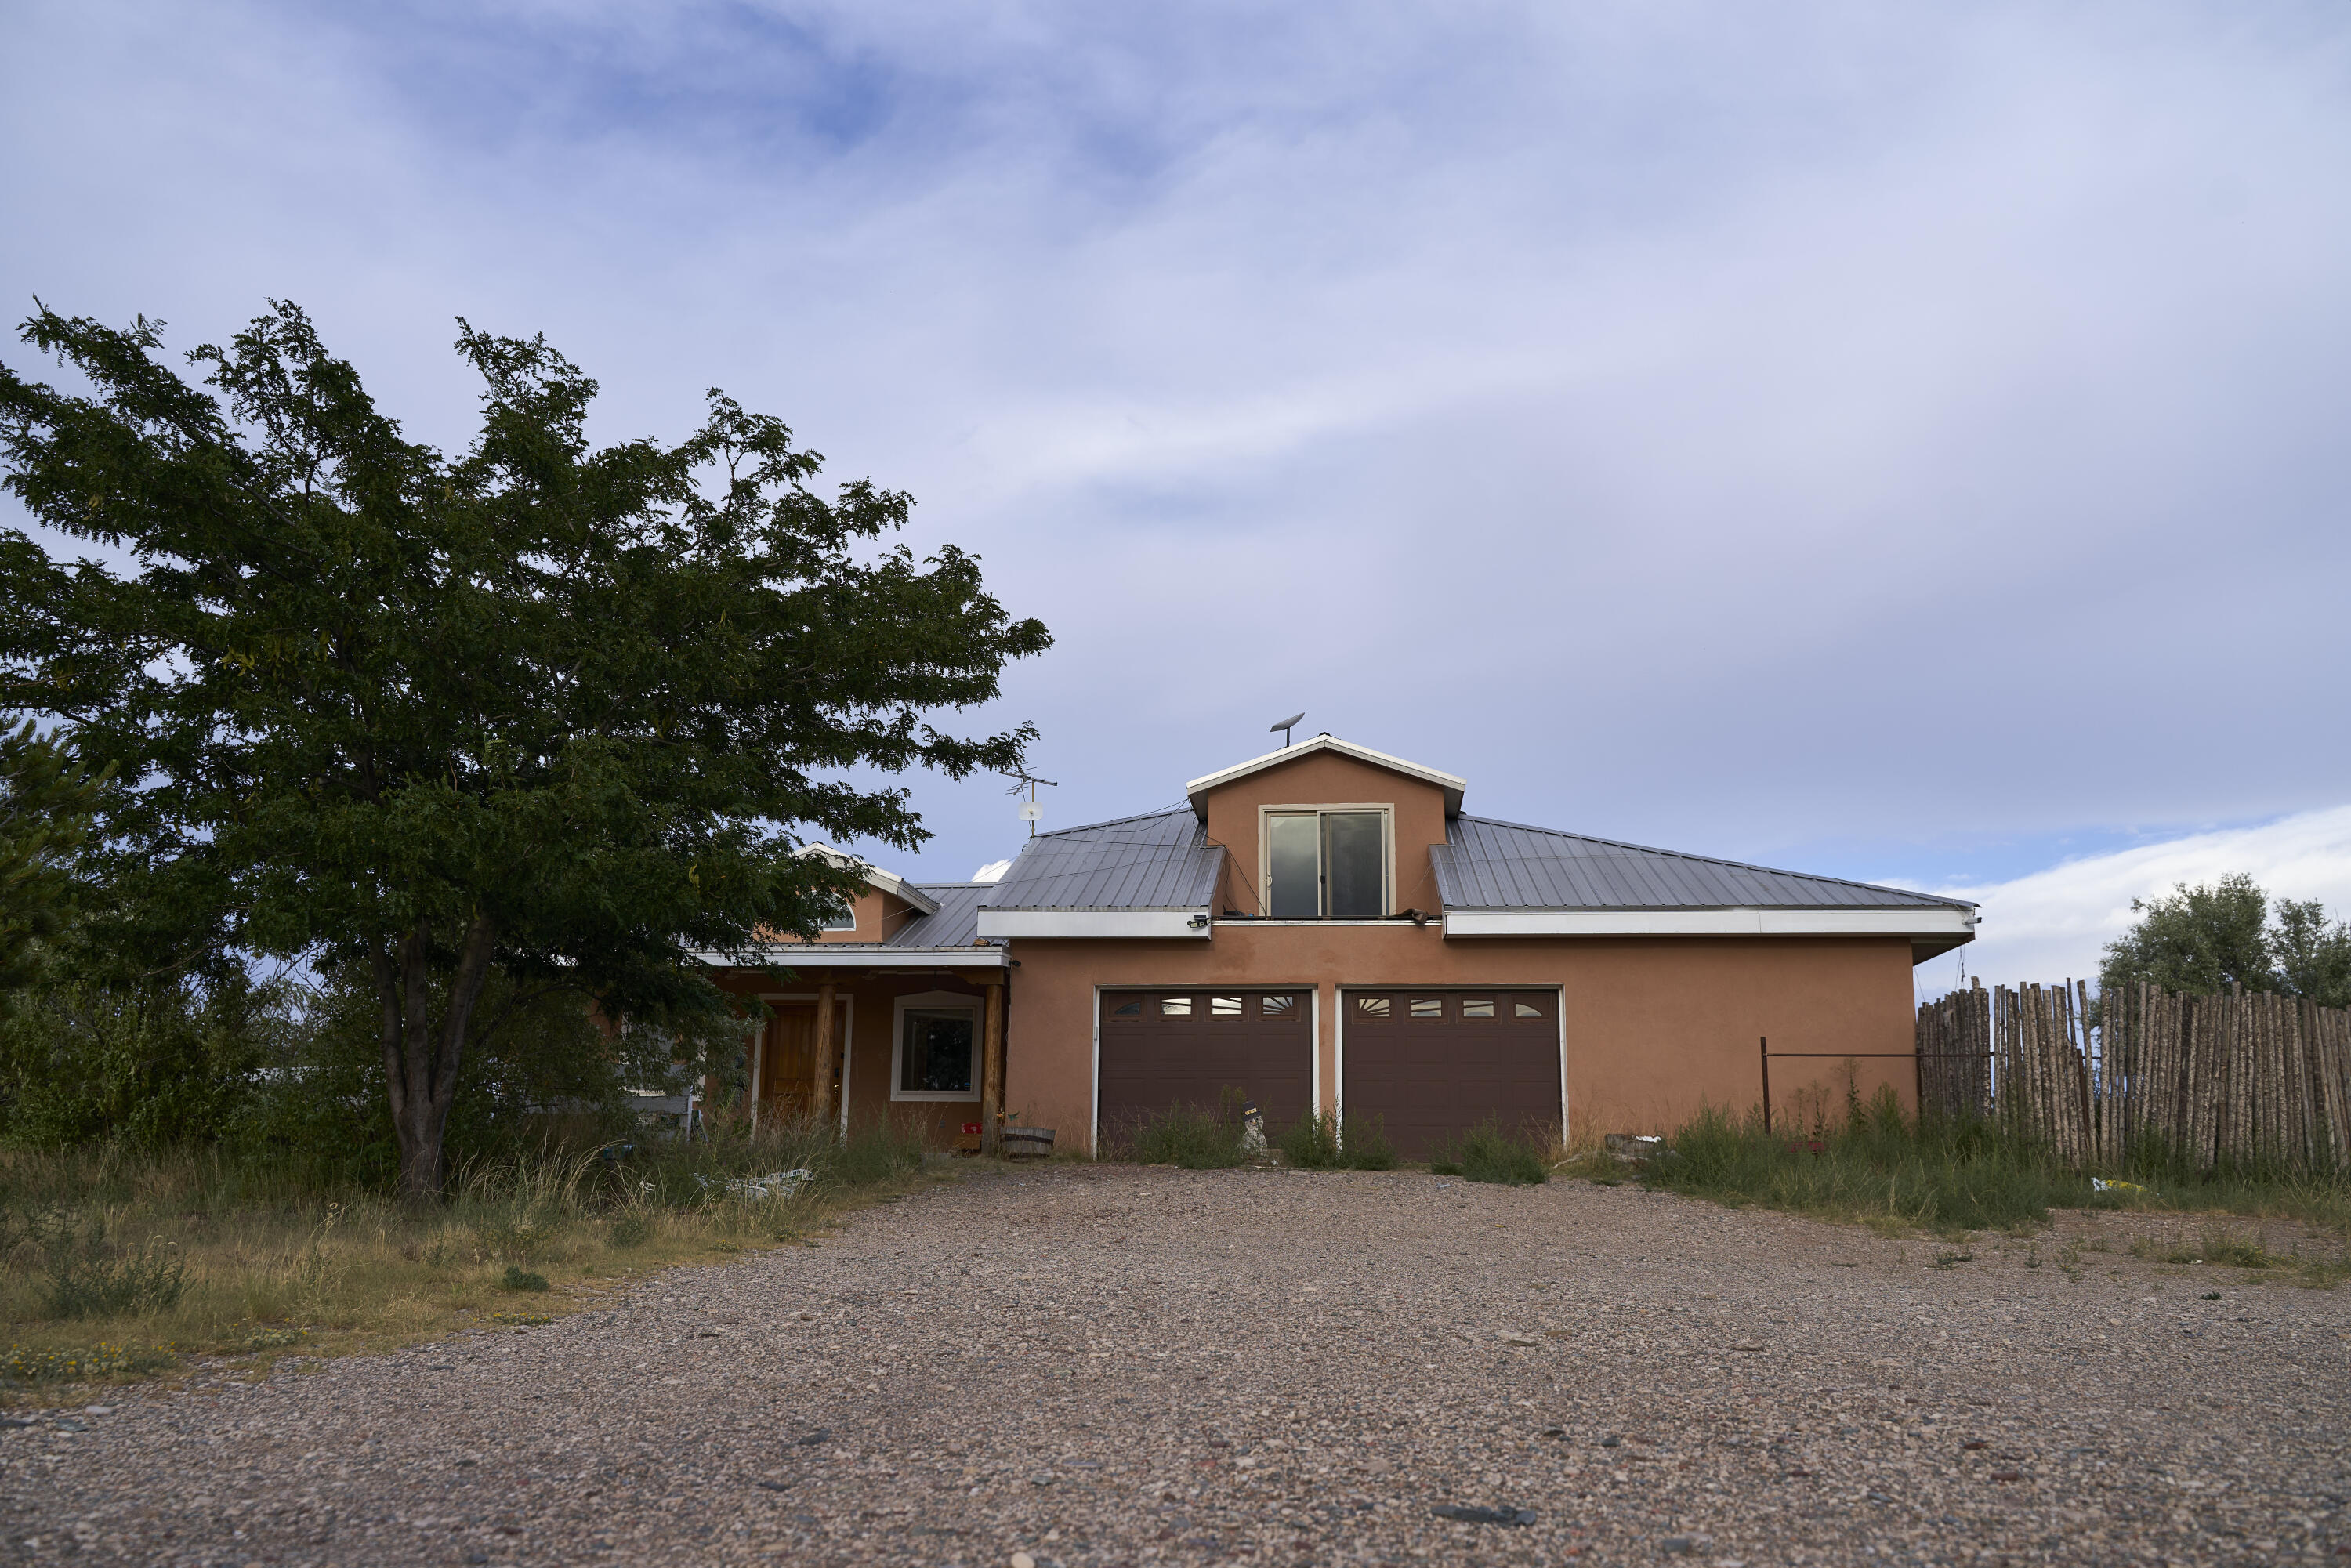 5 Yucca Lane, Moriarty, New Mexico 87035, 4 Bedrooms Bedrooms, ,2 BathroomsBathrooms,Residential,For Sale,5 Yucca Lane,1034826